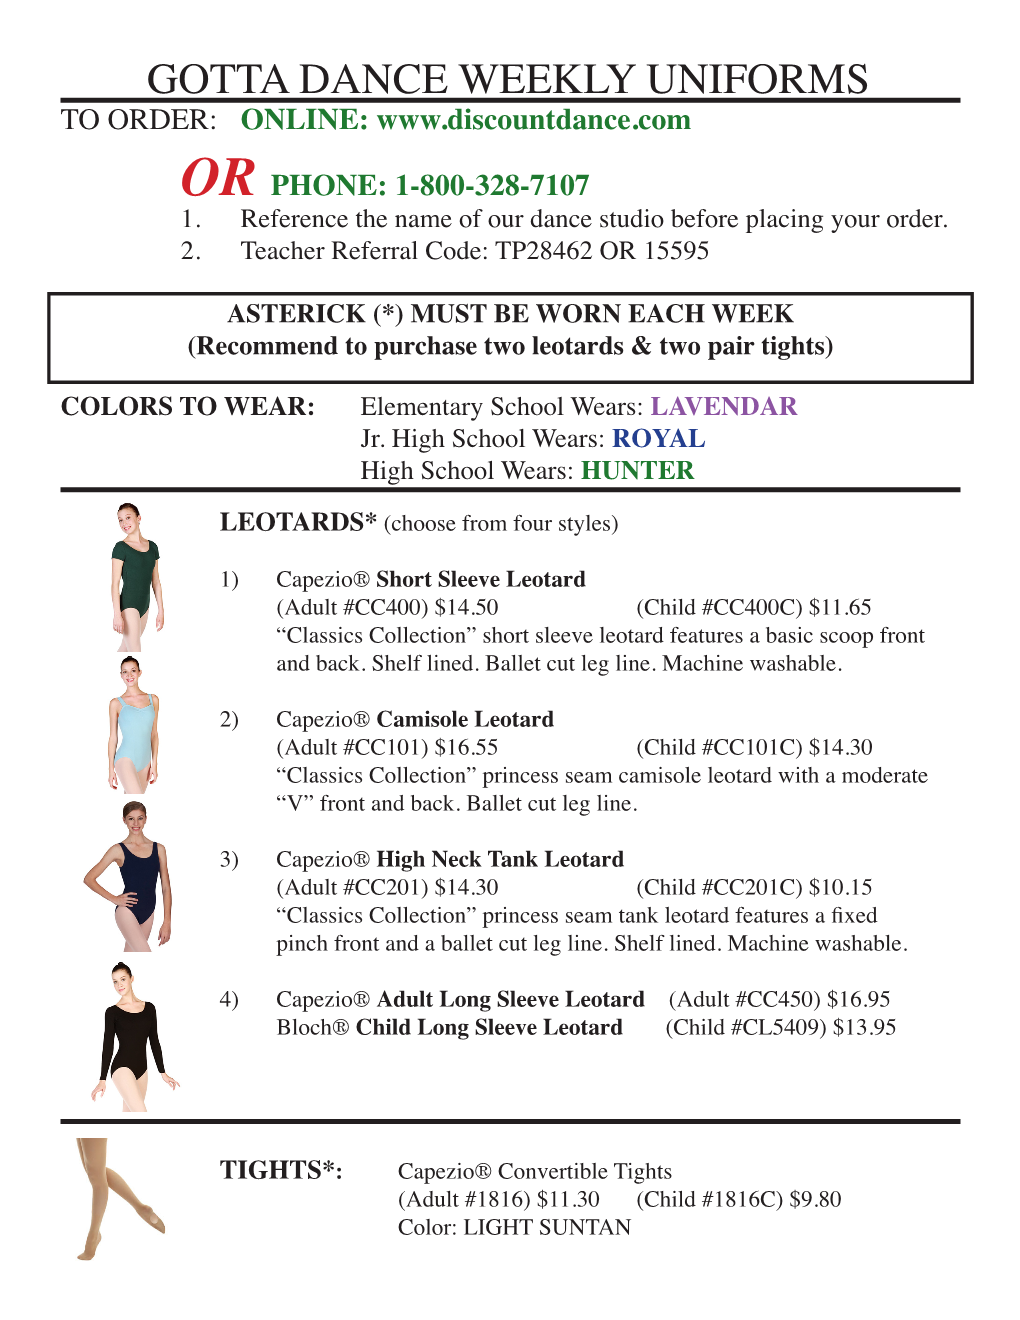 GOTTA DANCE WEEKLY Uniforms to ORDER: ONLINE: Or PHONE: 1-800-328-7107 1